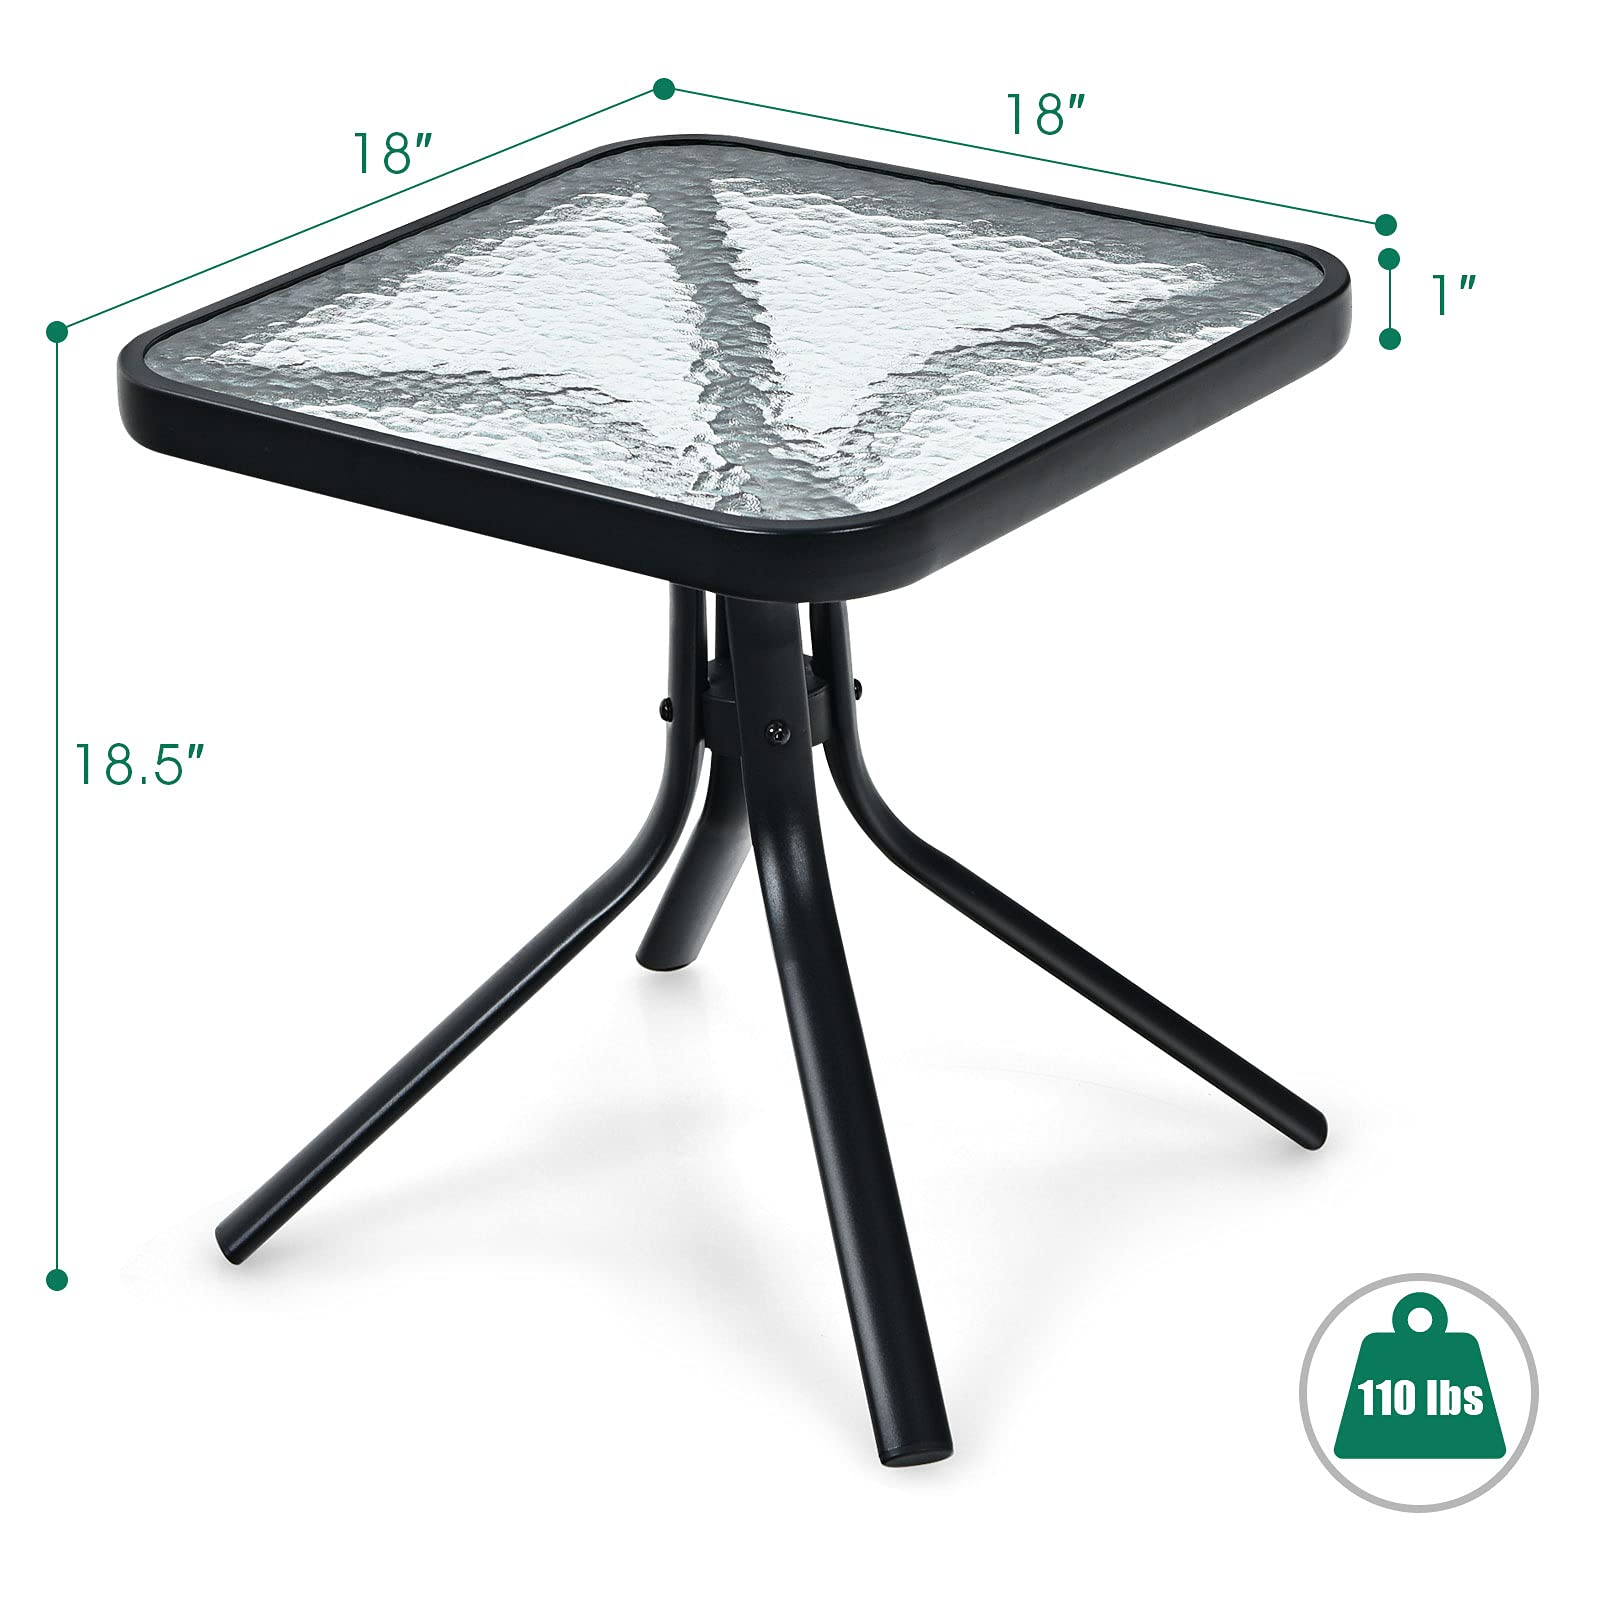 Giantex Patio Bistro Table, Outside Metal Square Bar Dining Table W/Tempered Glass Tabletop for Deck